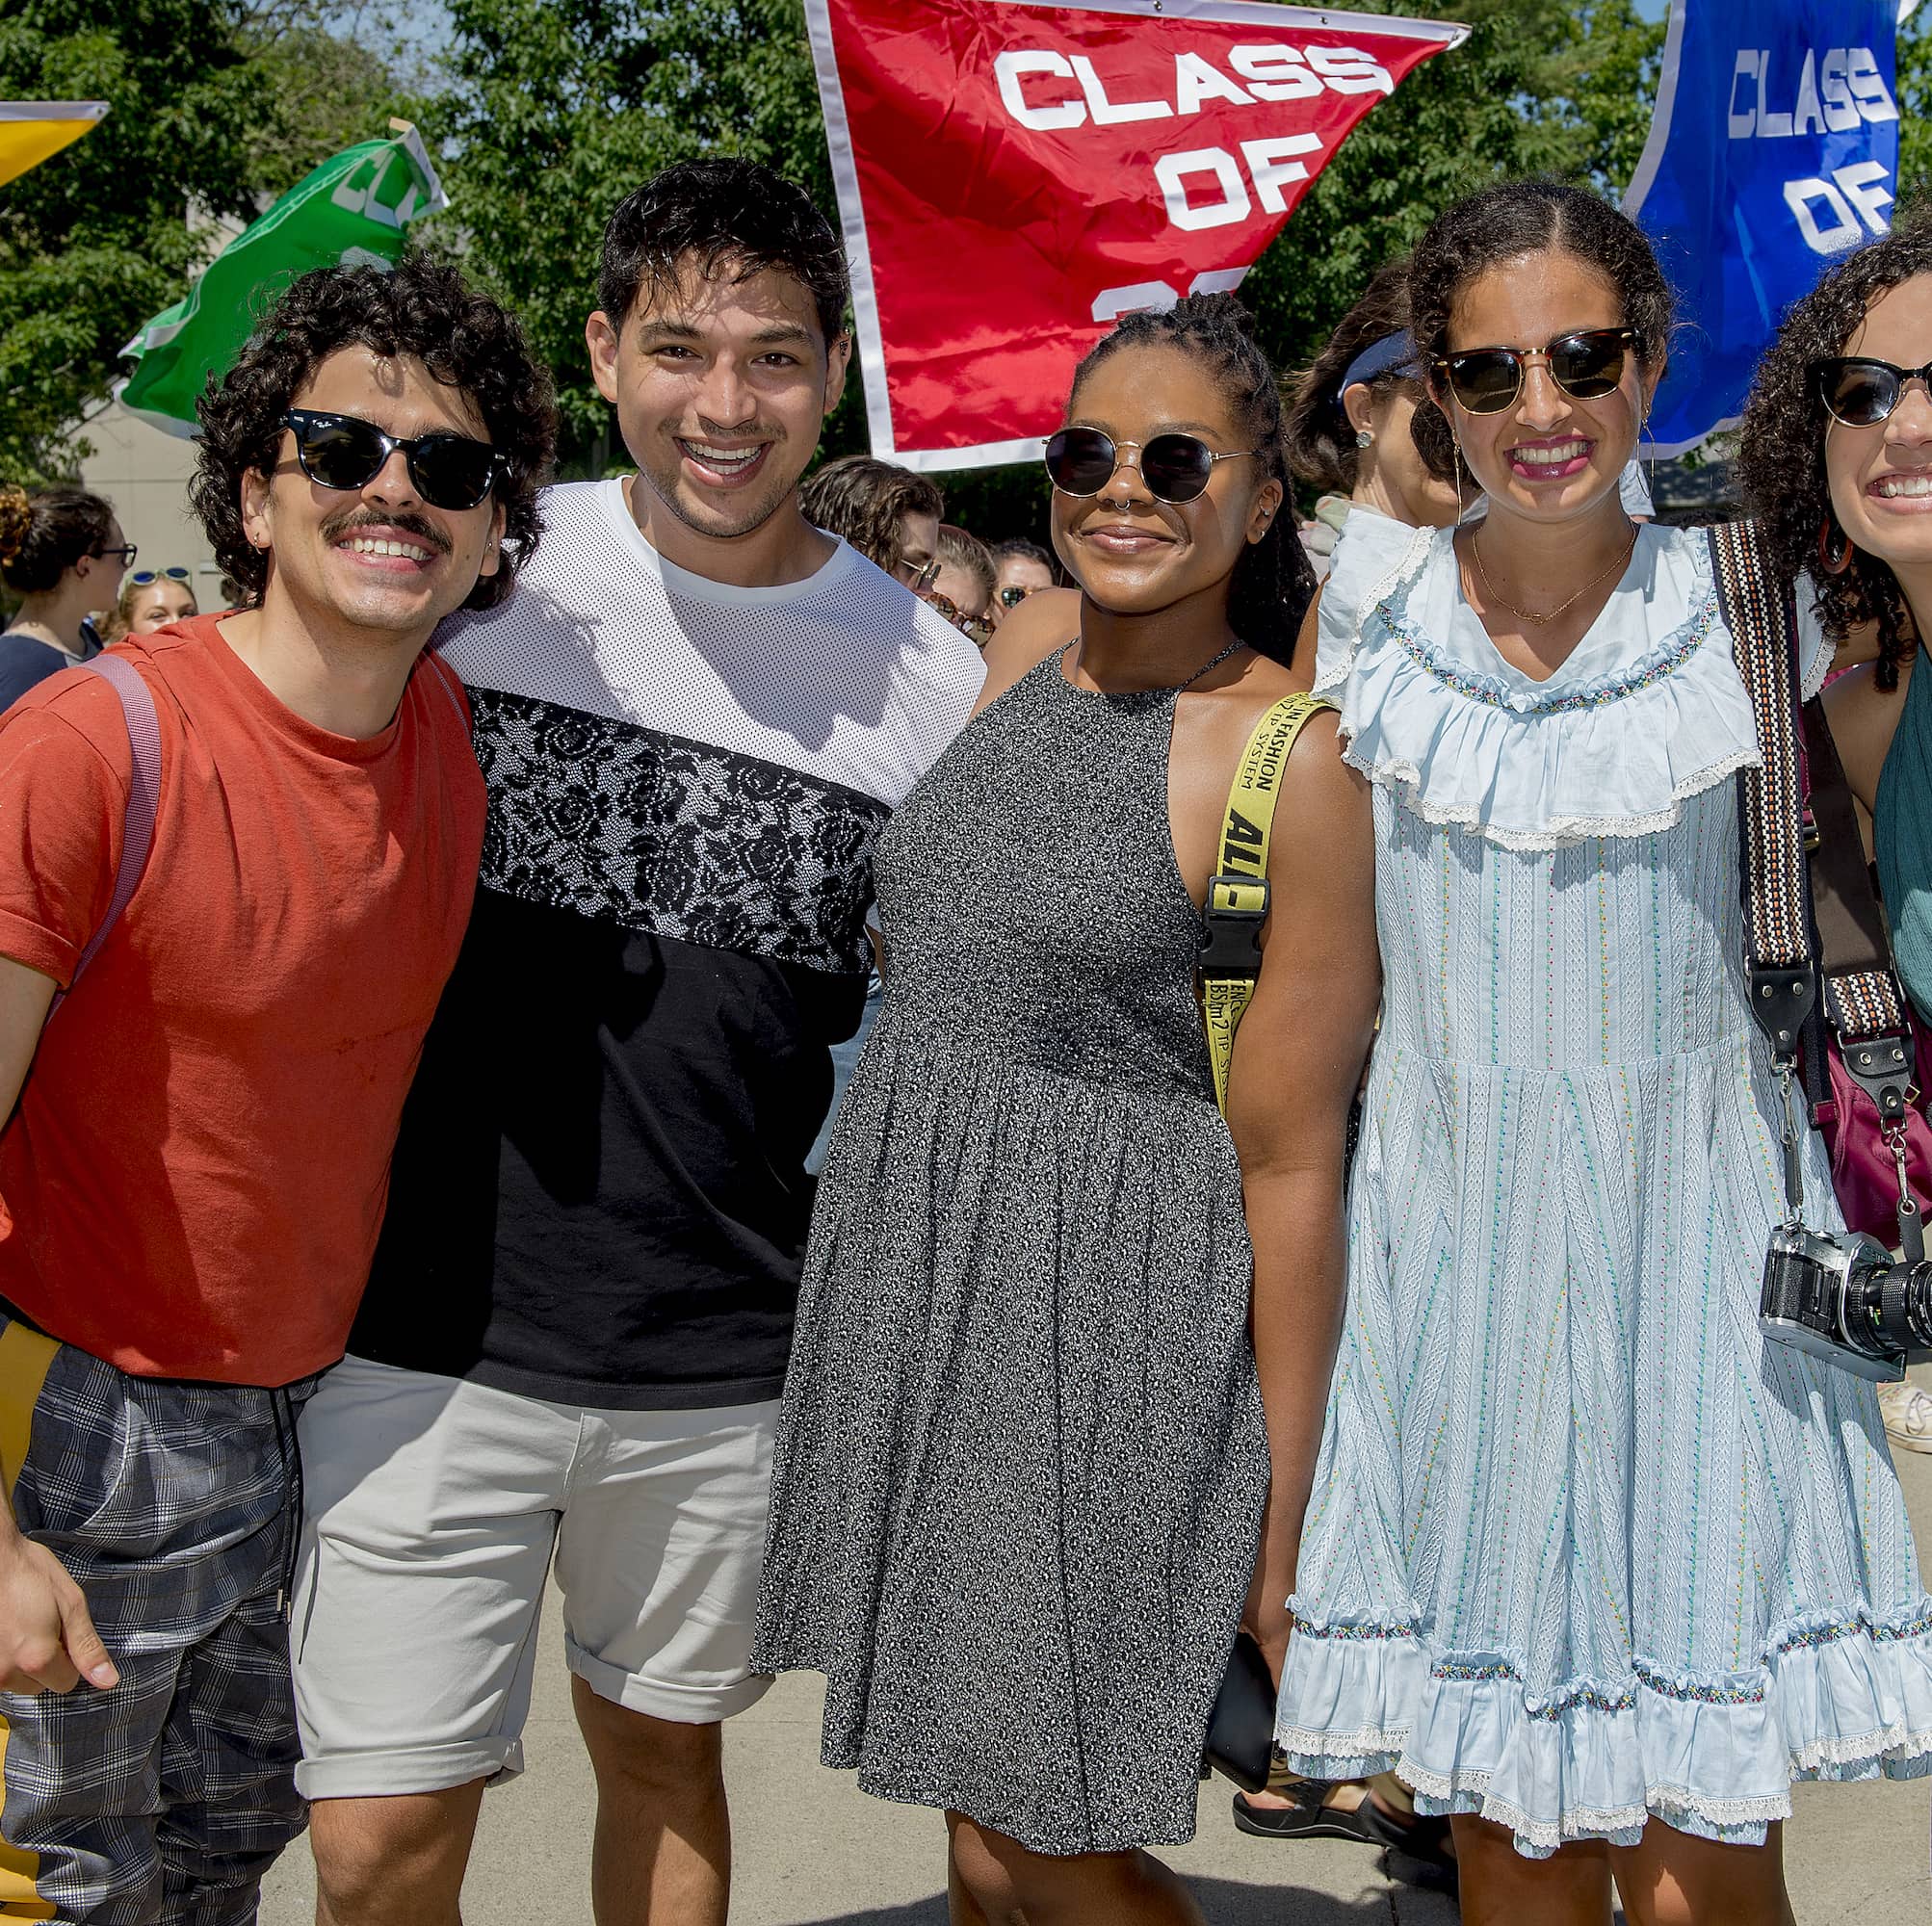 A group of people standing arm in arm at an event smile at the viewer.